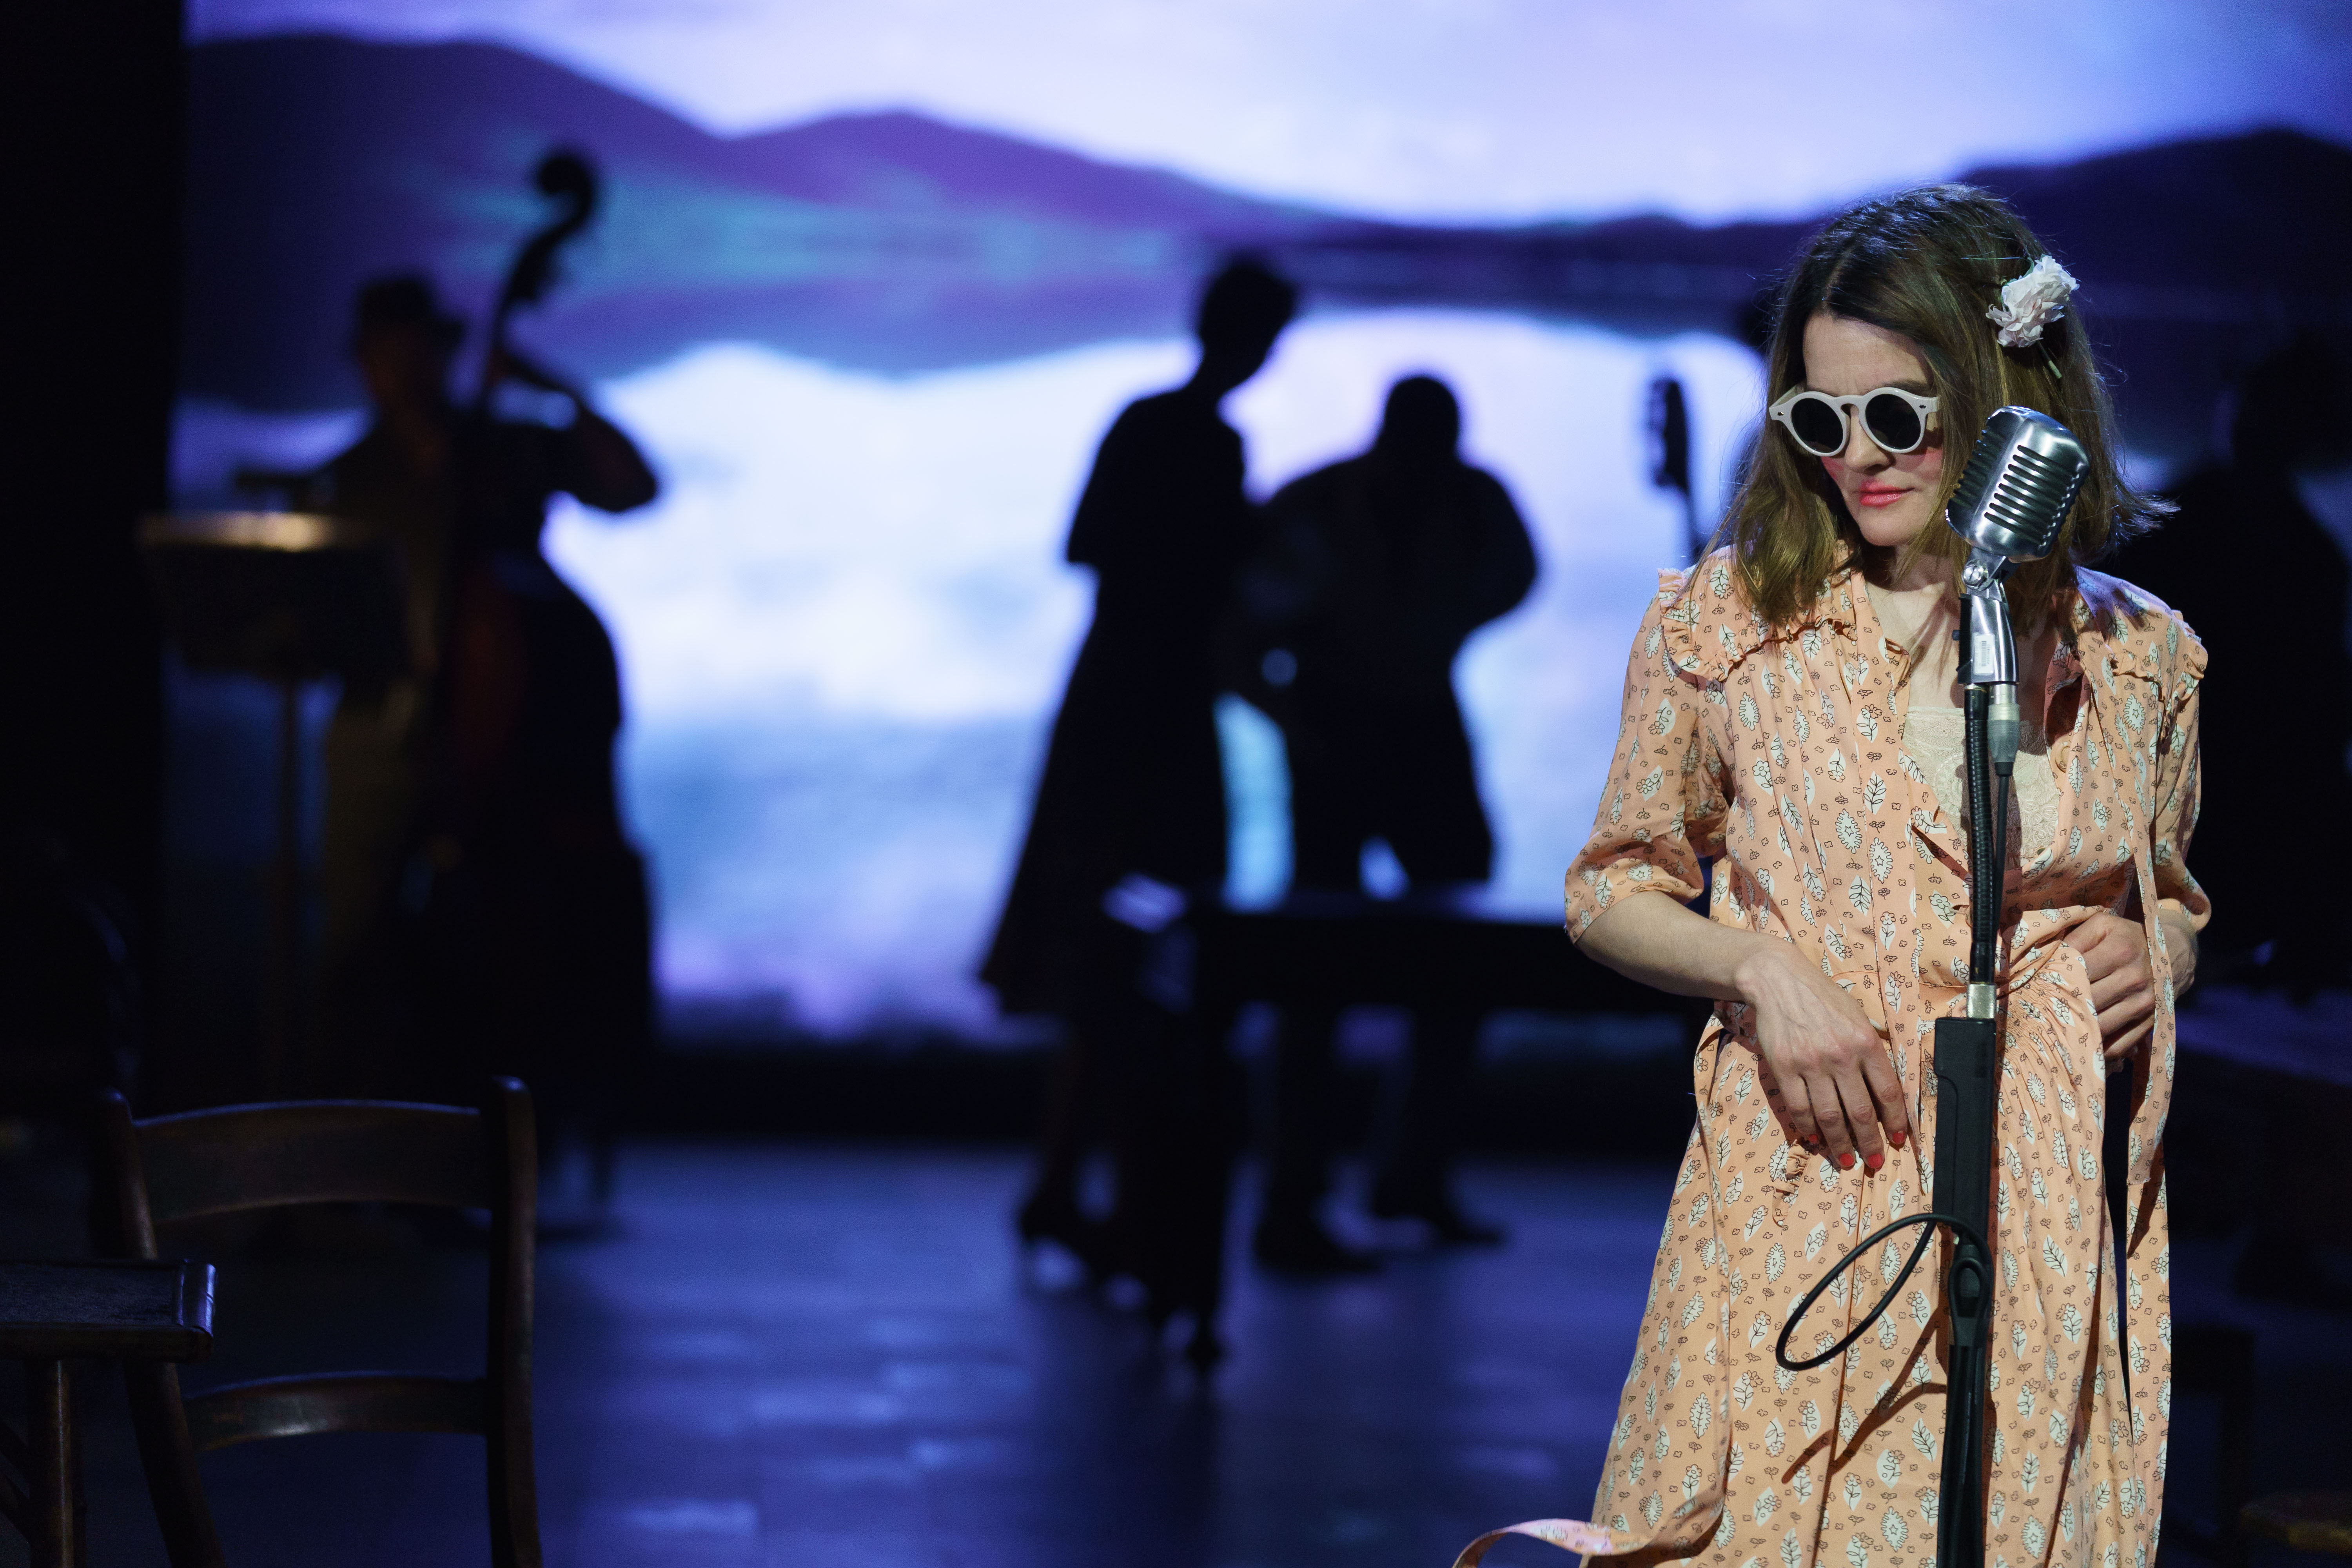  Shirley Henderson (Elizabeth Laine) in GFTNC at The Old Vic. Photo by Manuel Harlan